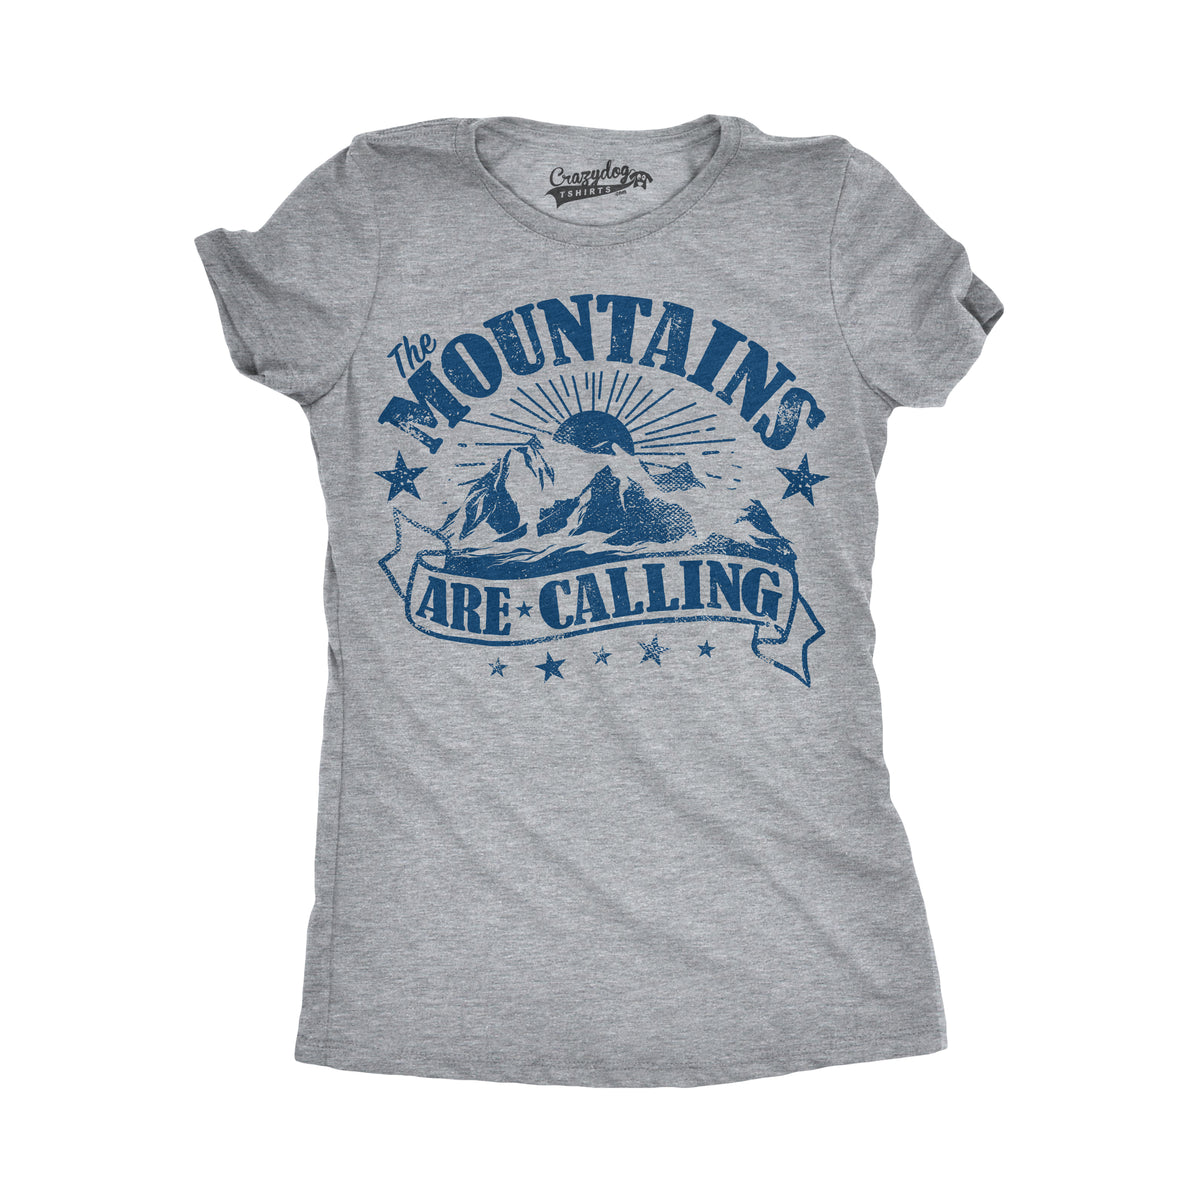 Funny Light Heather Grey The Mountains Are Calling Womens T Shirt Nerdy Camping Retro hiking Tee